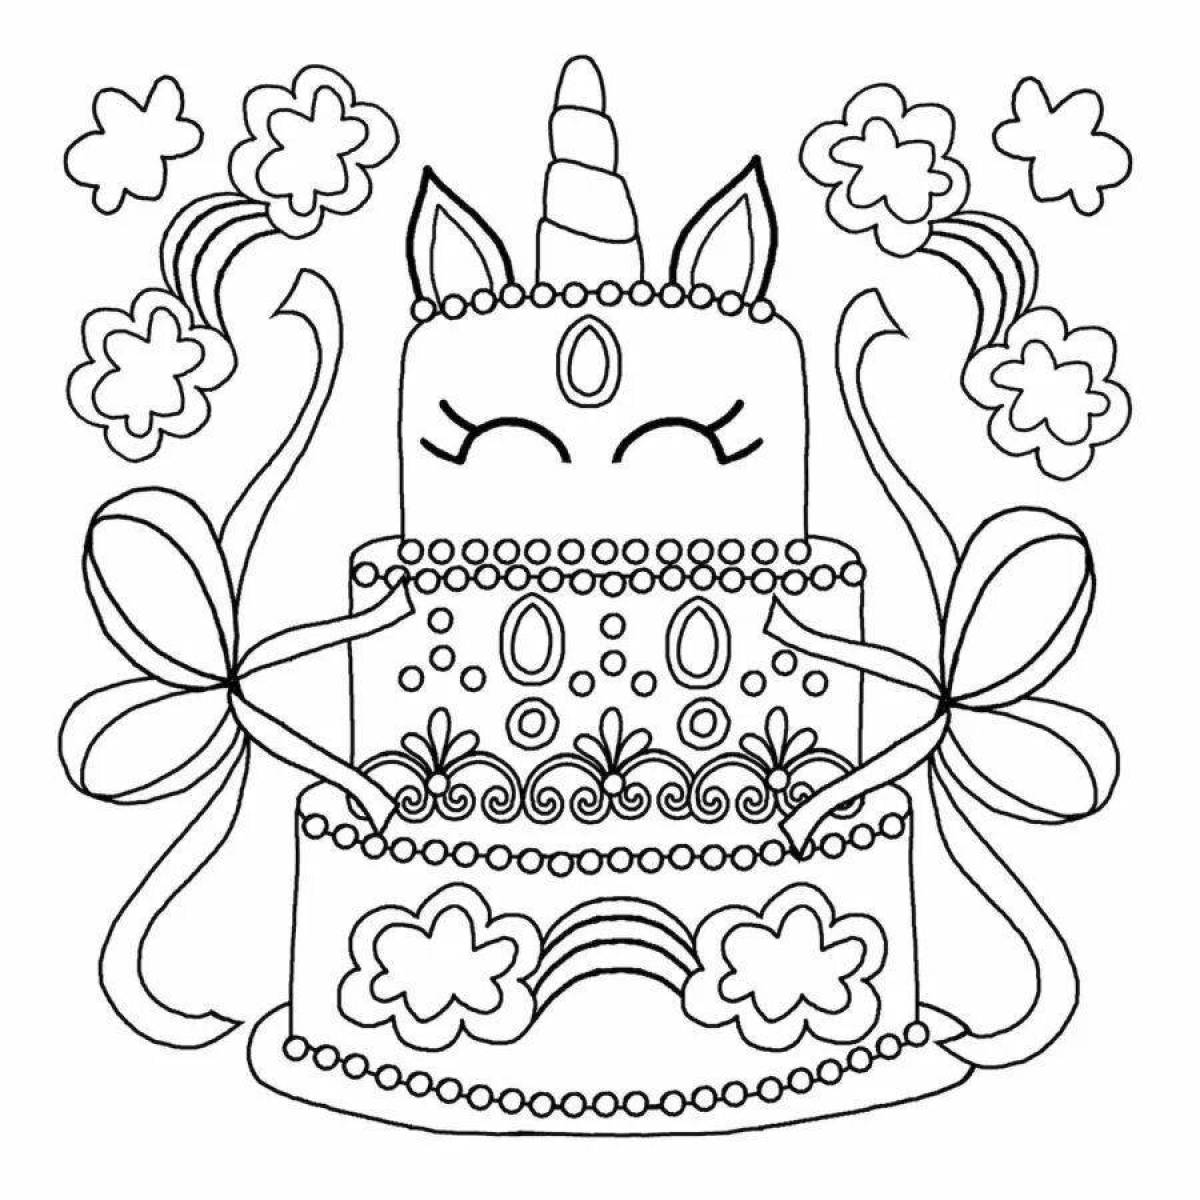 Color-frenzy cake coloring page for children 6-7 years old